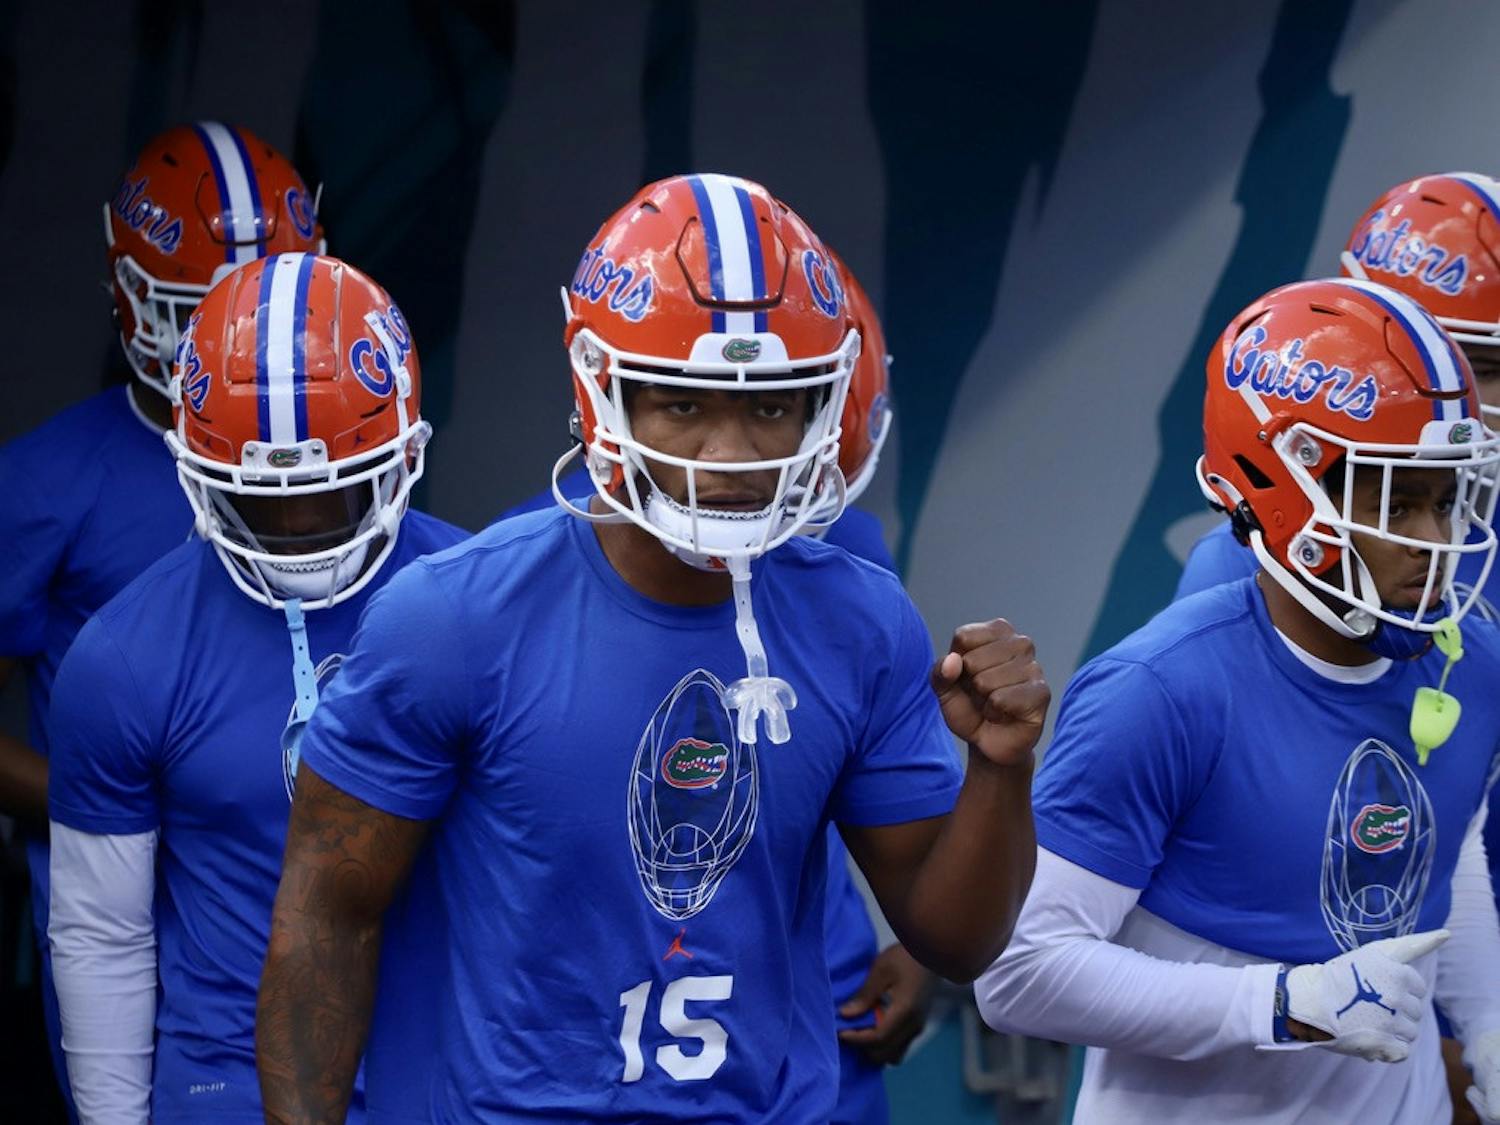 Florida quarterback Anthony Richardson in his warm up shirt ahead of the Gators' Oct. 30 game against No. 1 Georgia.